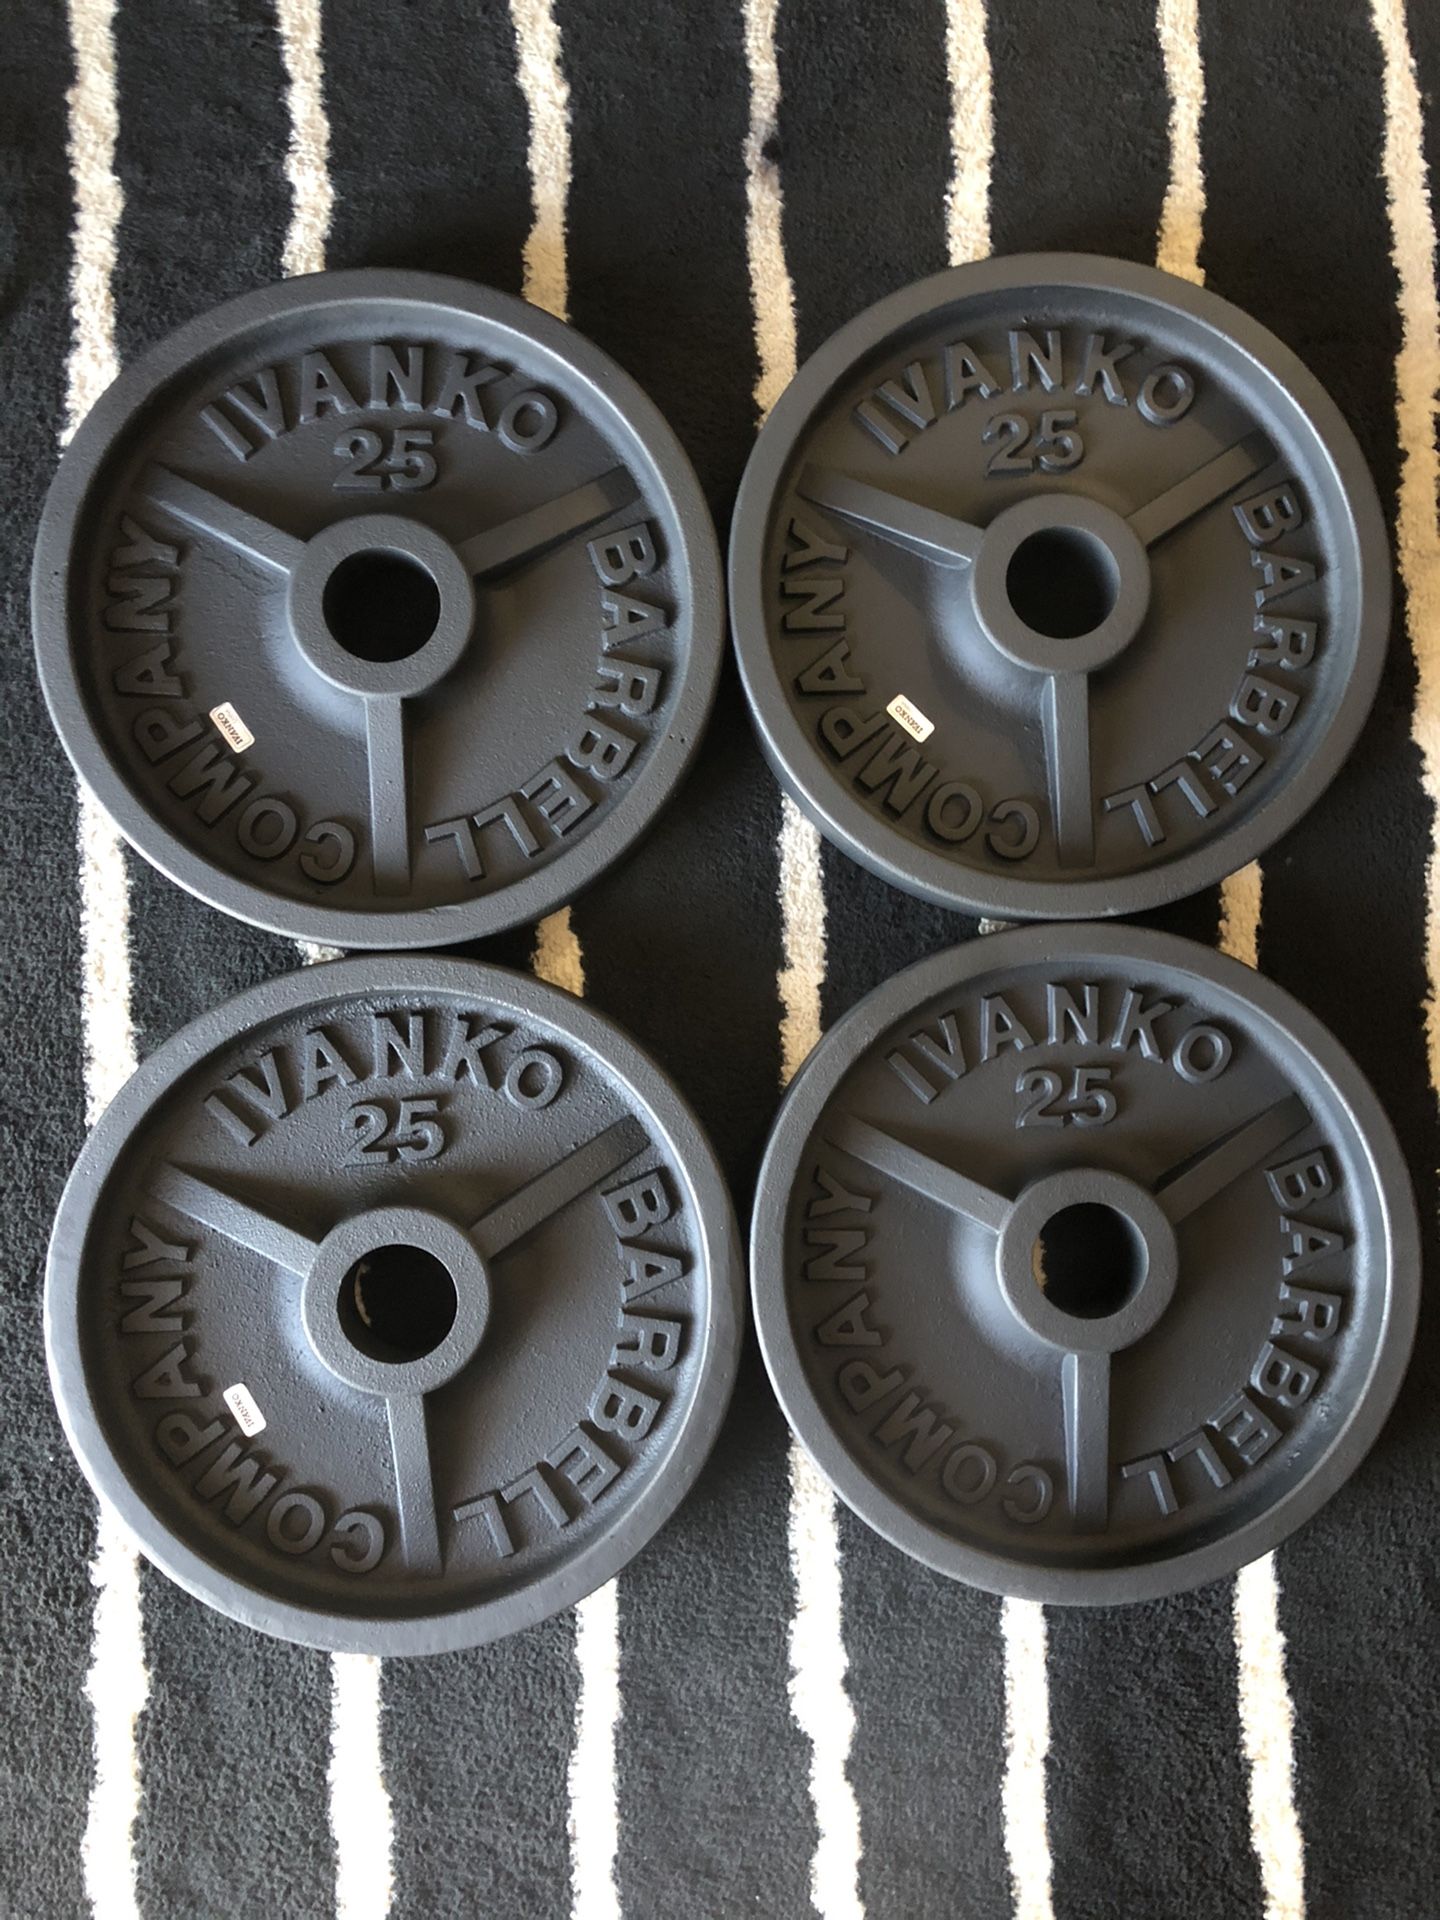 Olympic weight plates!!!!